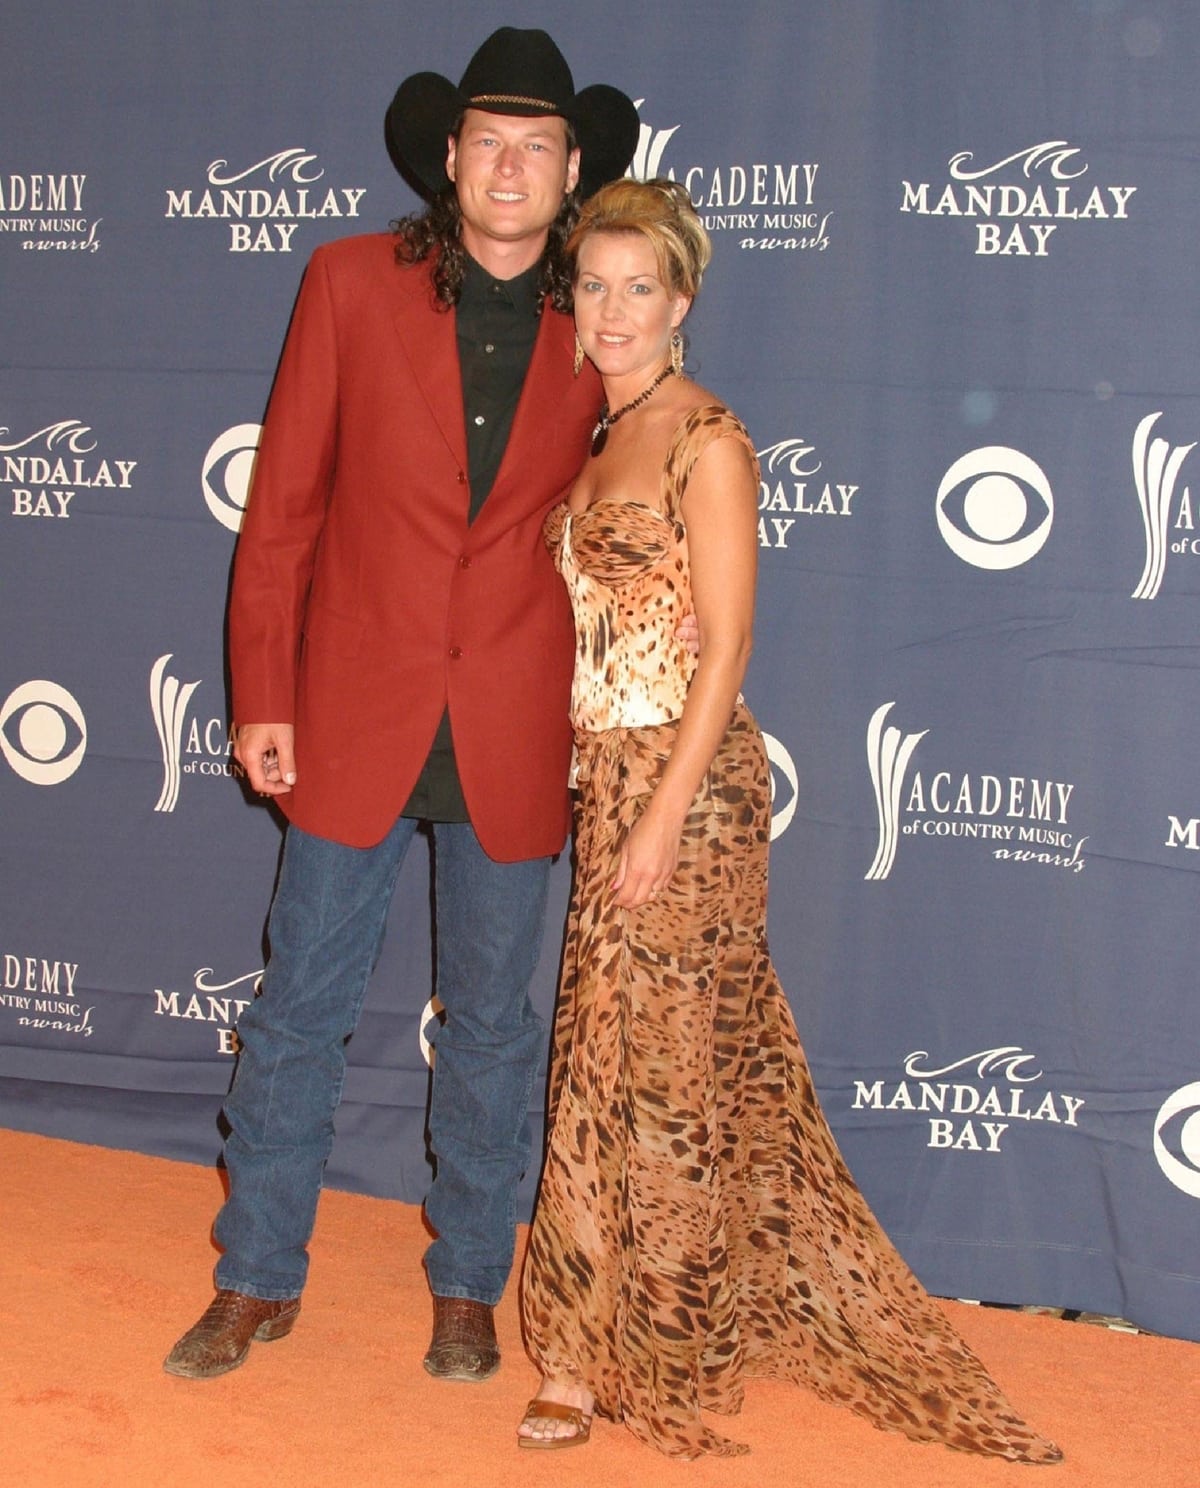 Blake Shelton was married to his high school sweetheart Kaynette Williams (also known as Kaynette Gern) from November 17, 2003, until their split in 2006